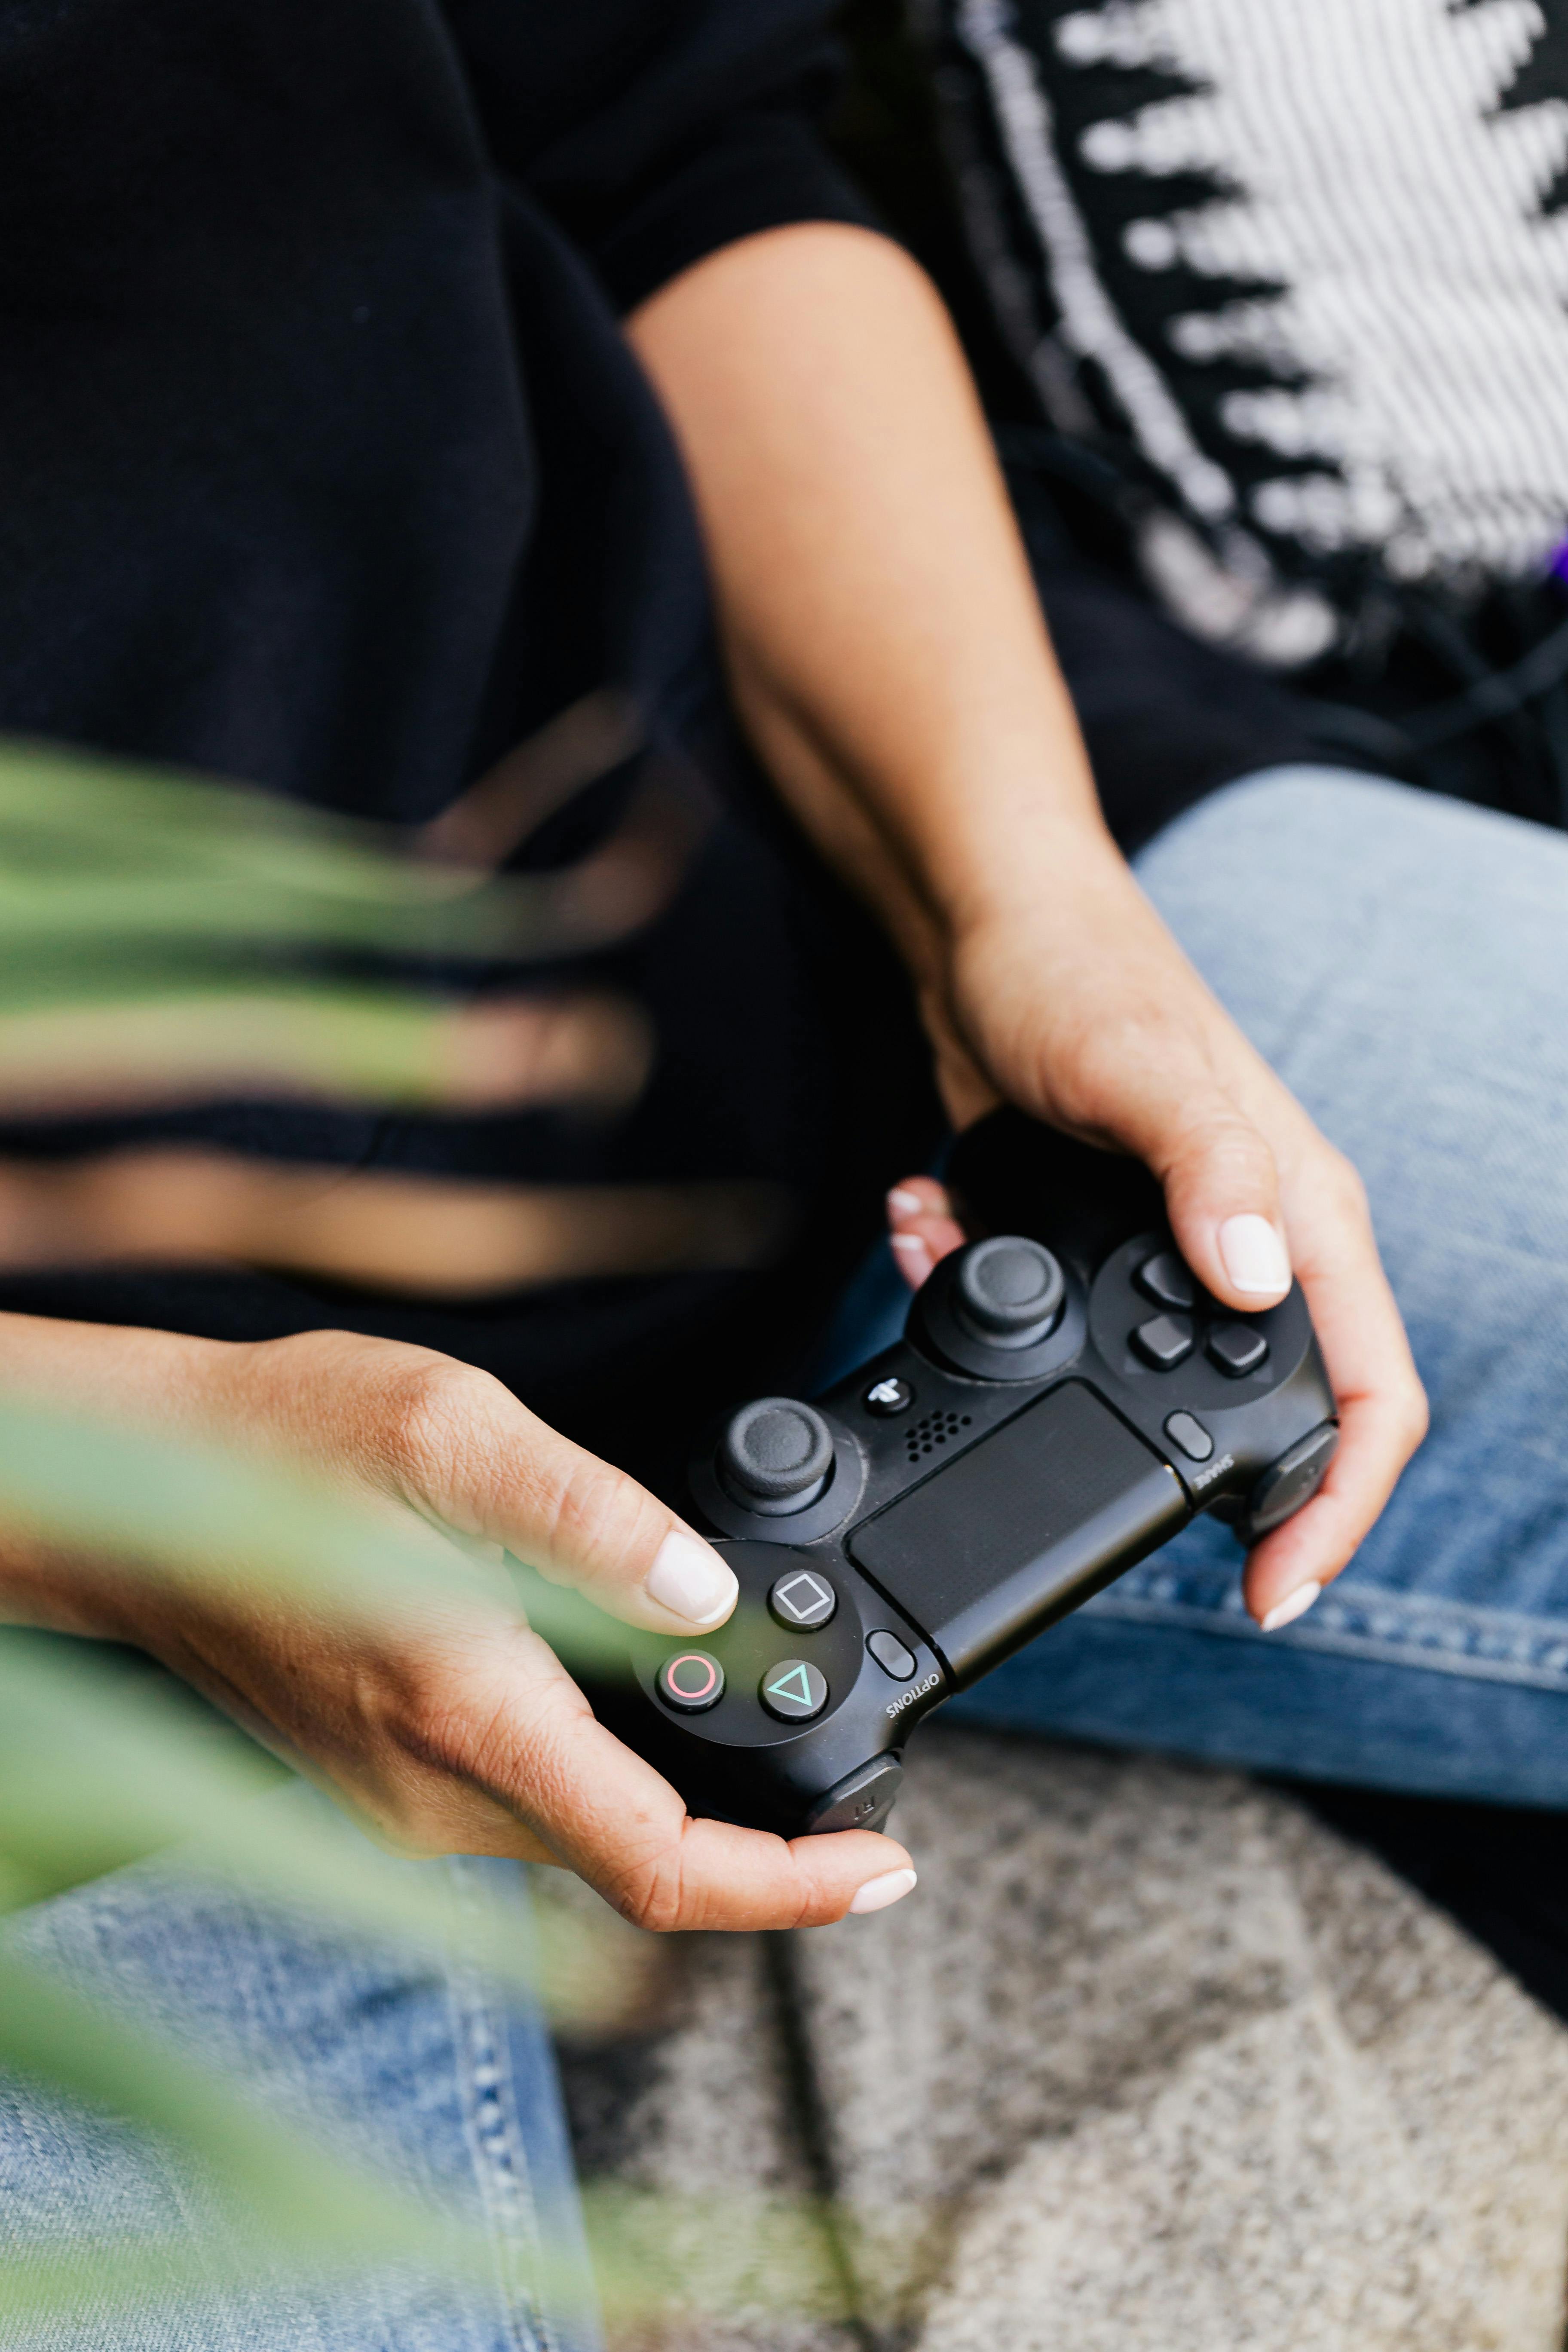 a close up shot of a person using a video game controller